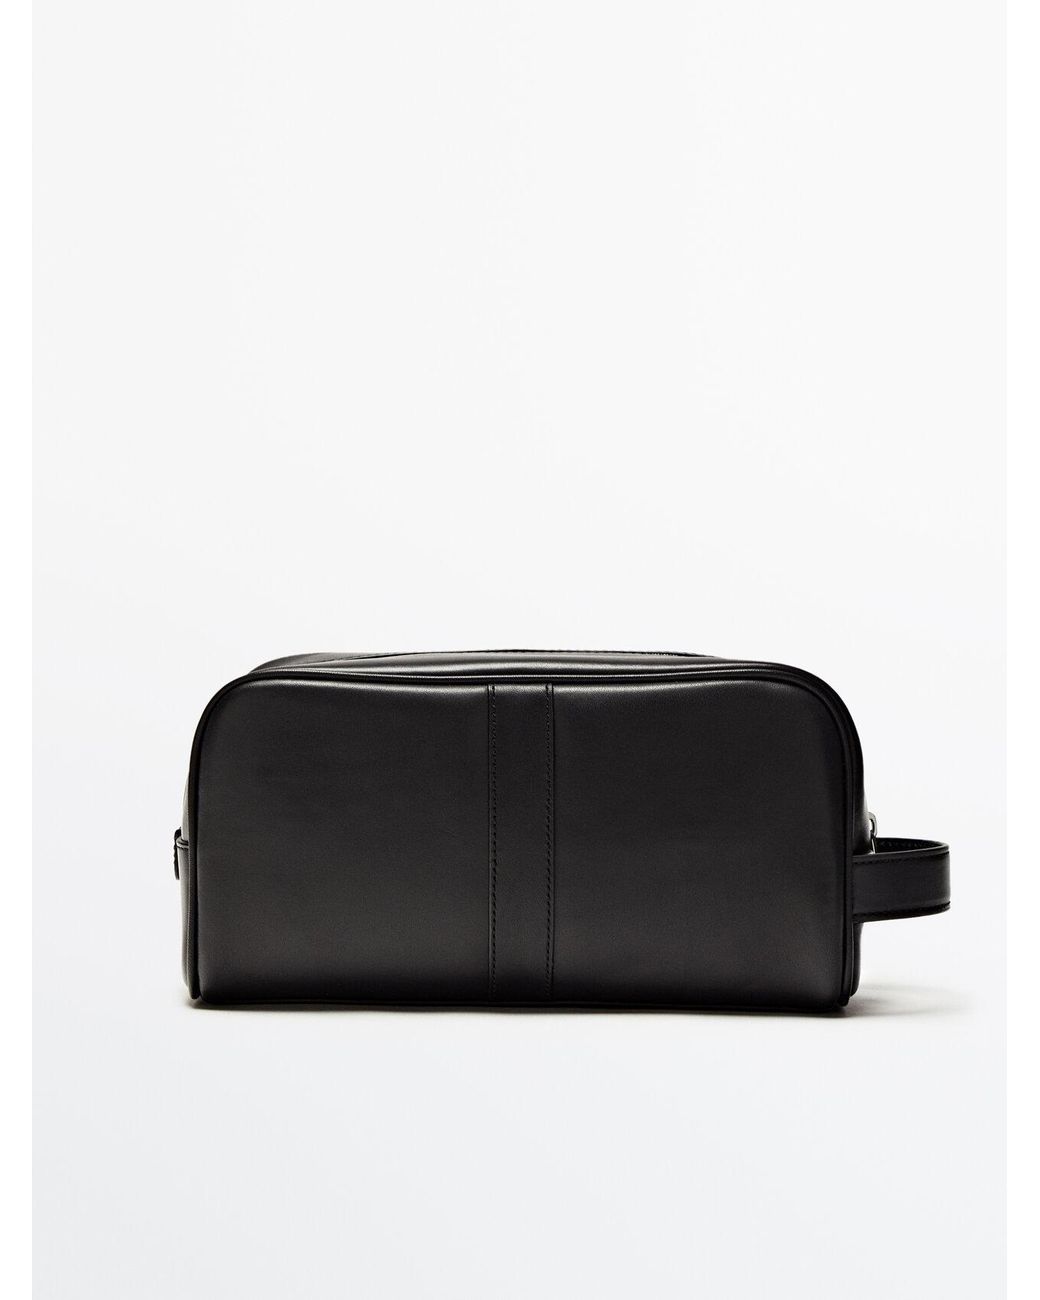 MASSIMO DUTTI Leather Toiletry Bag With Zip in Black for Men | Lyst